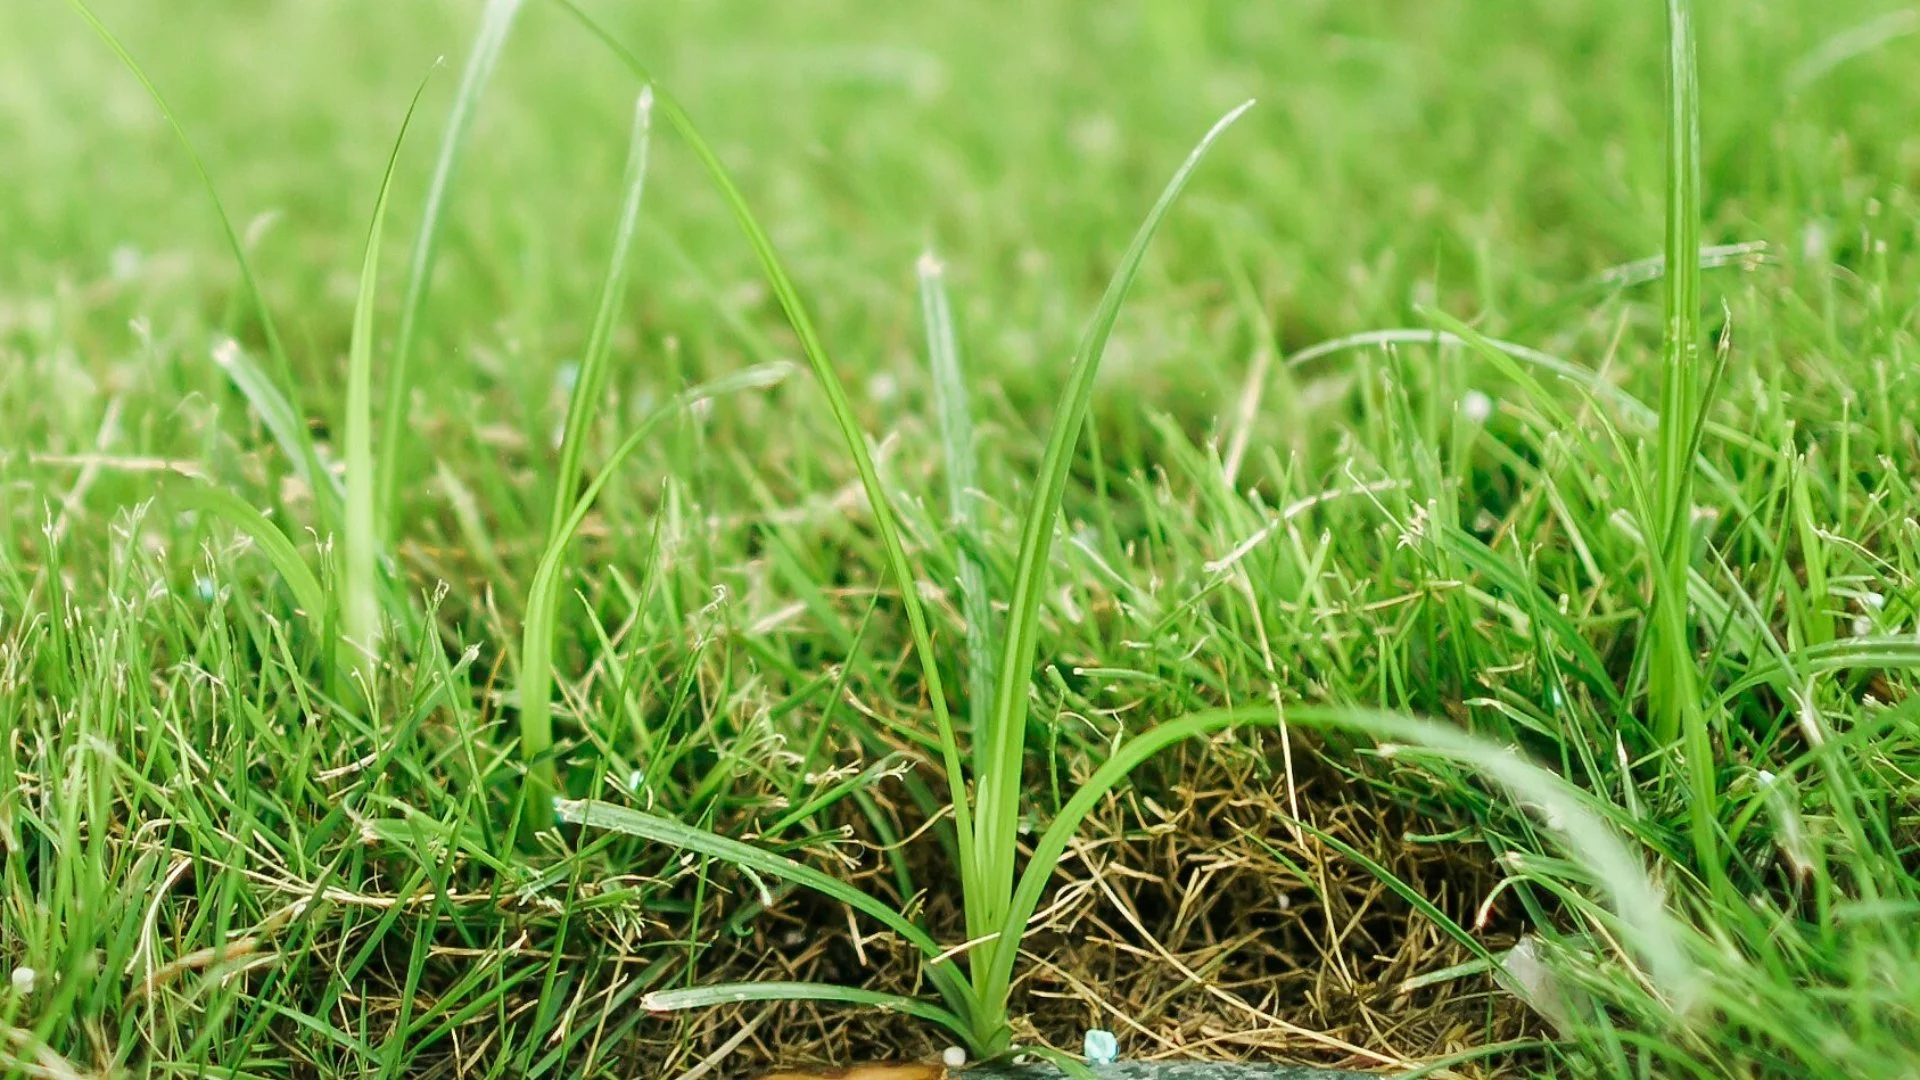 4 Lawn Diseases That Commonly Appear on Lawns in Texas